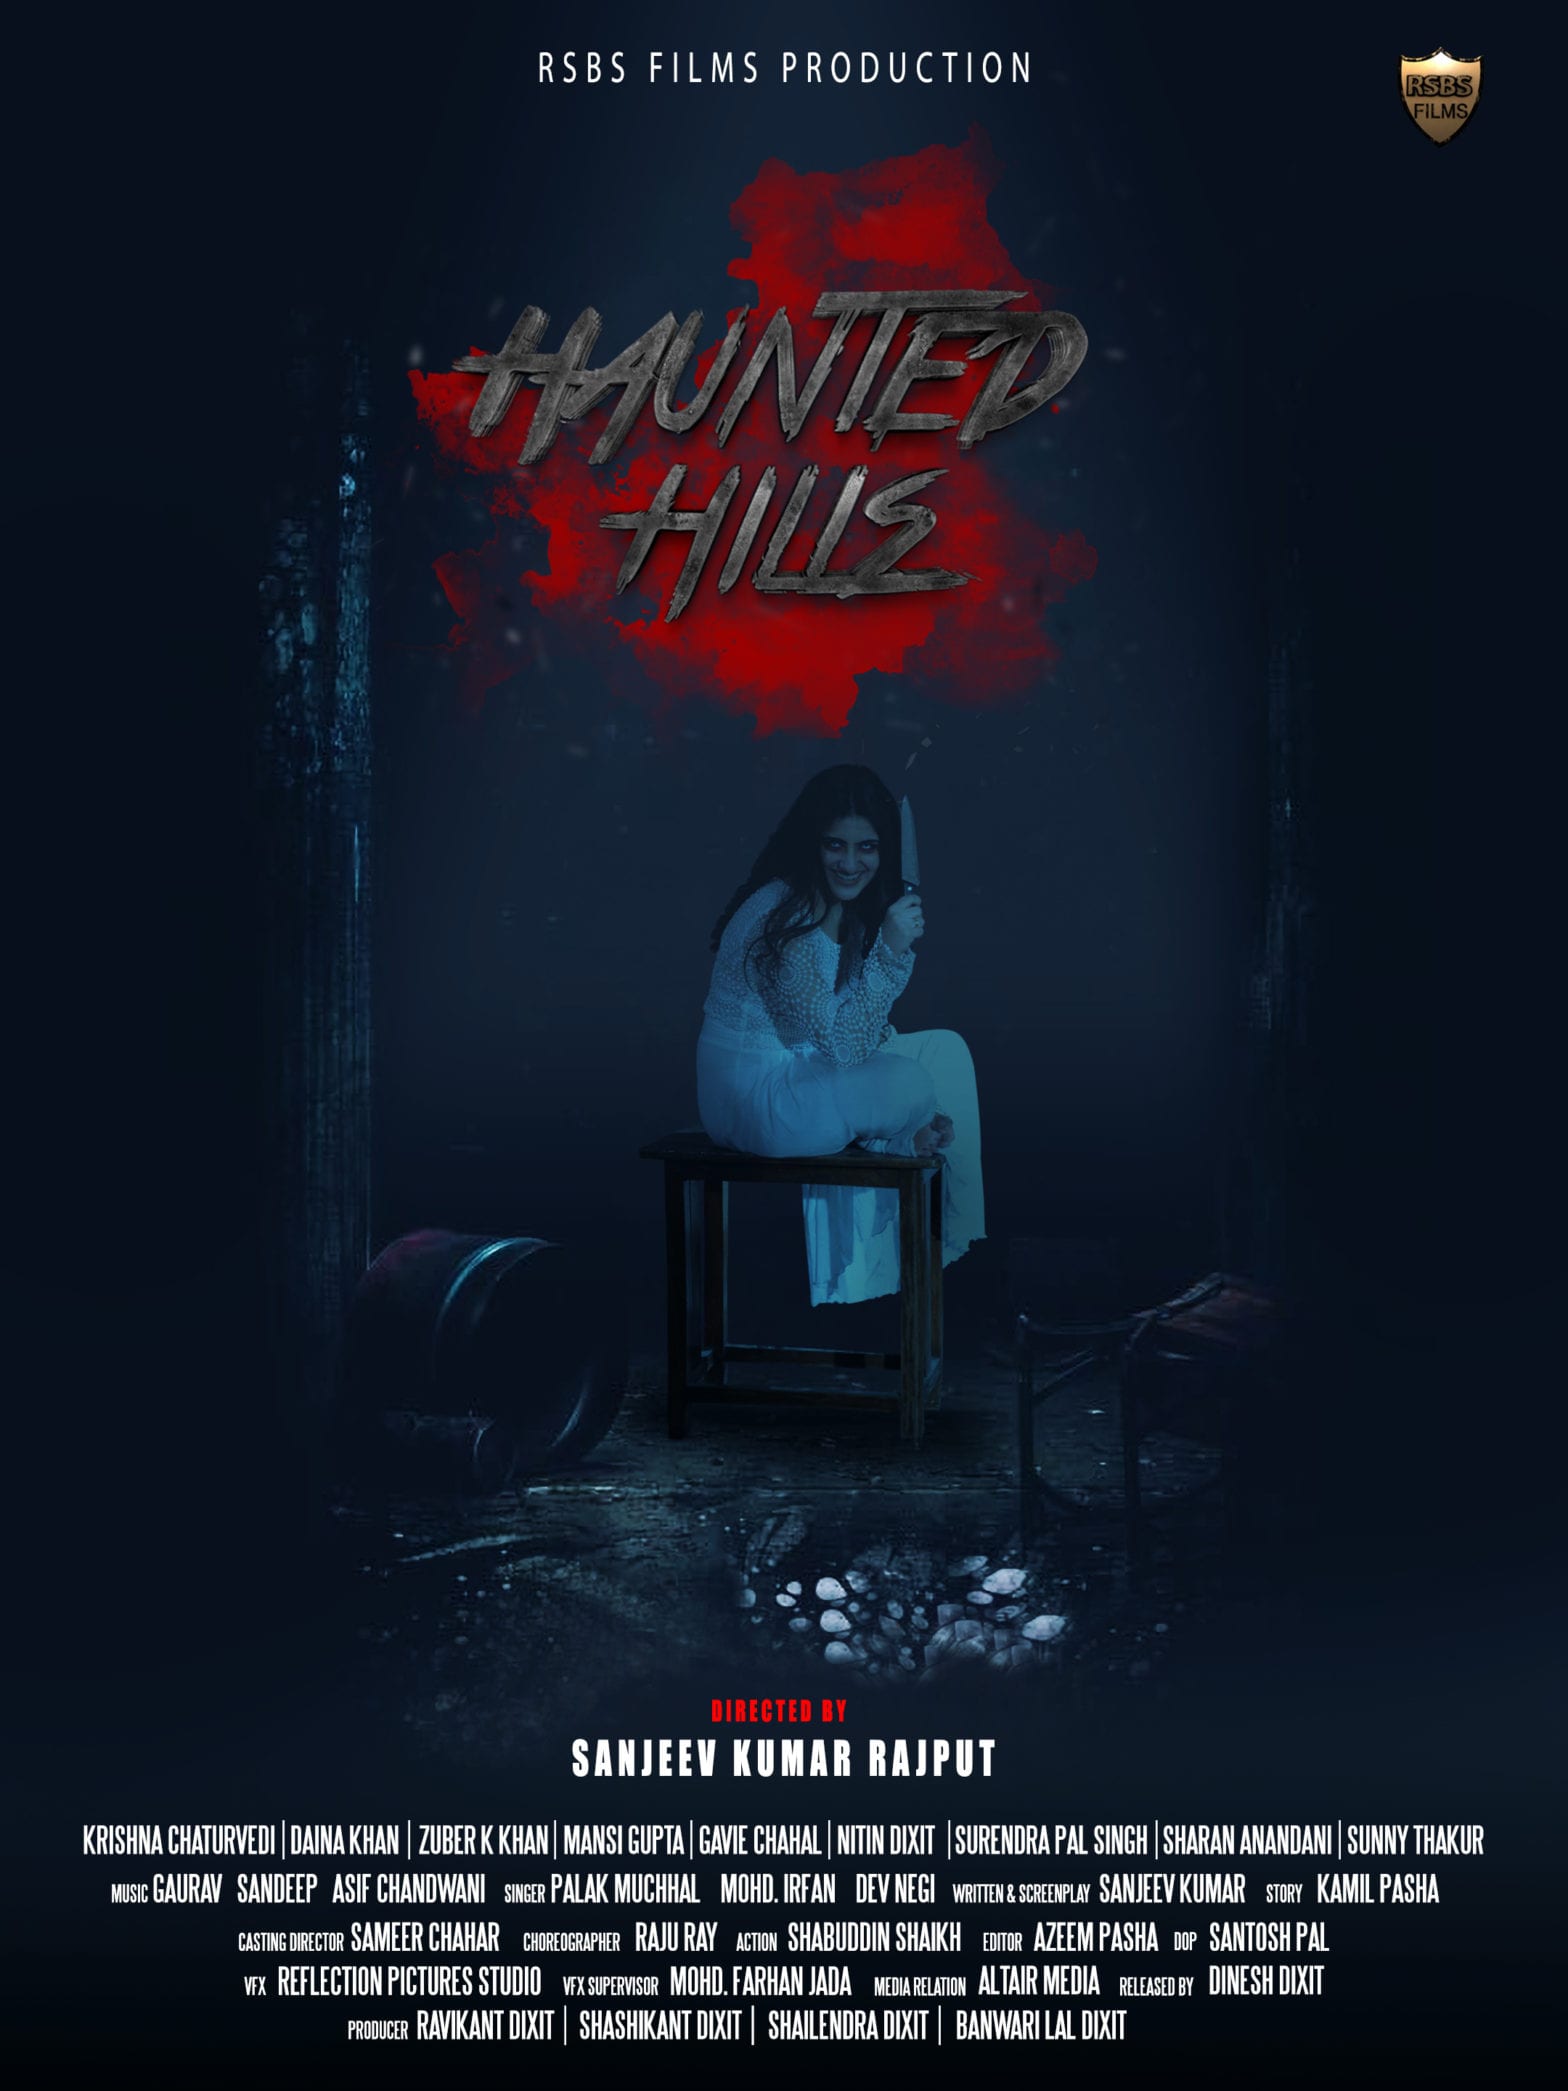 Poster for the movie "Haunted Hills"